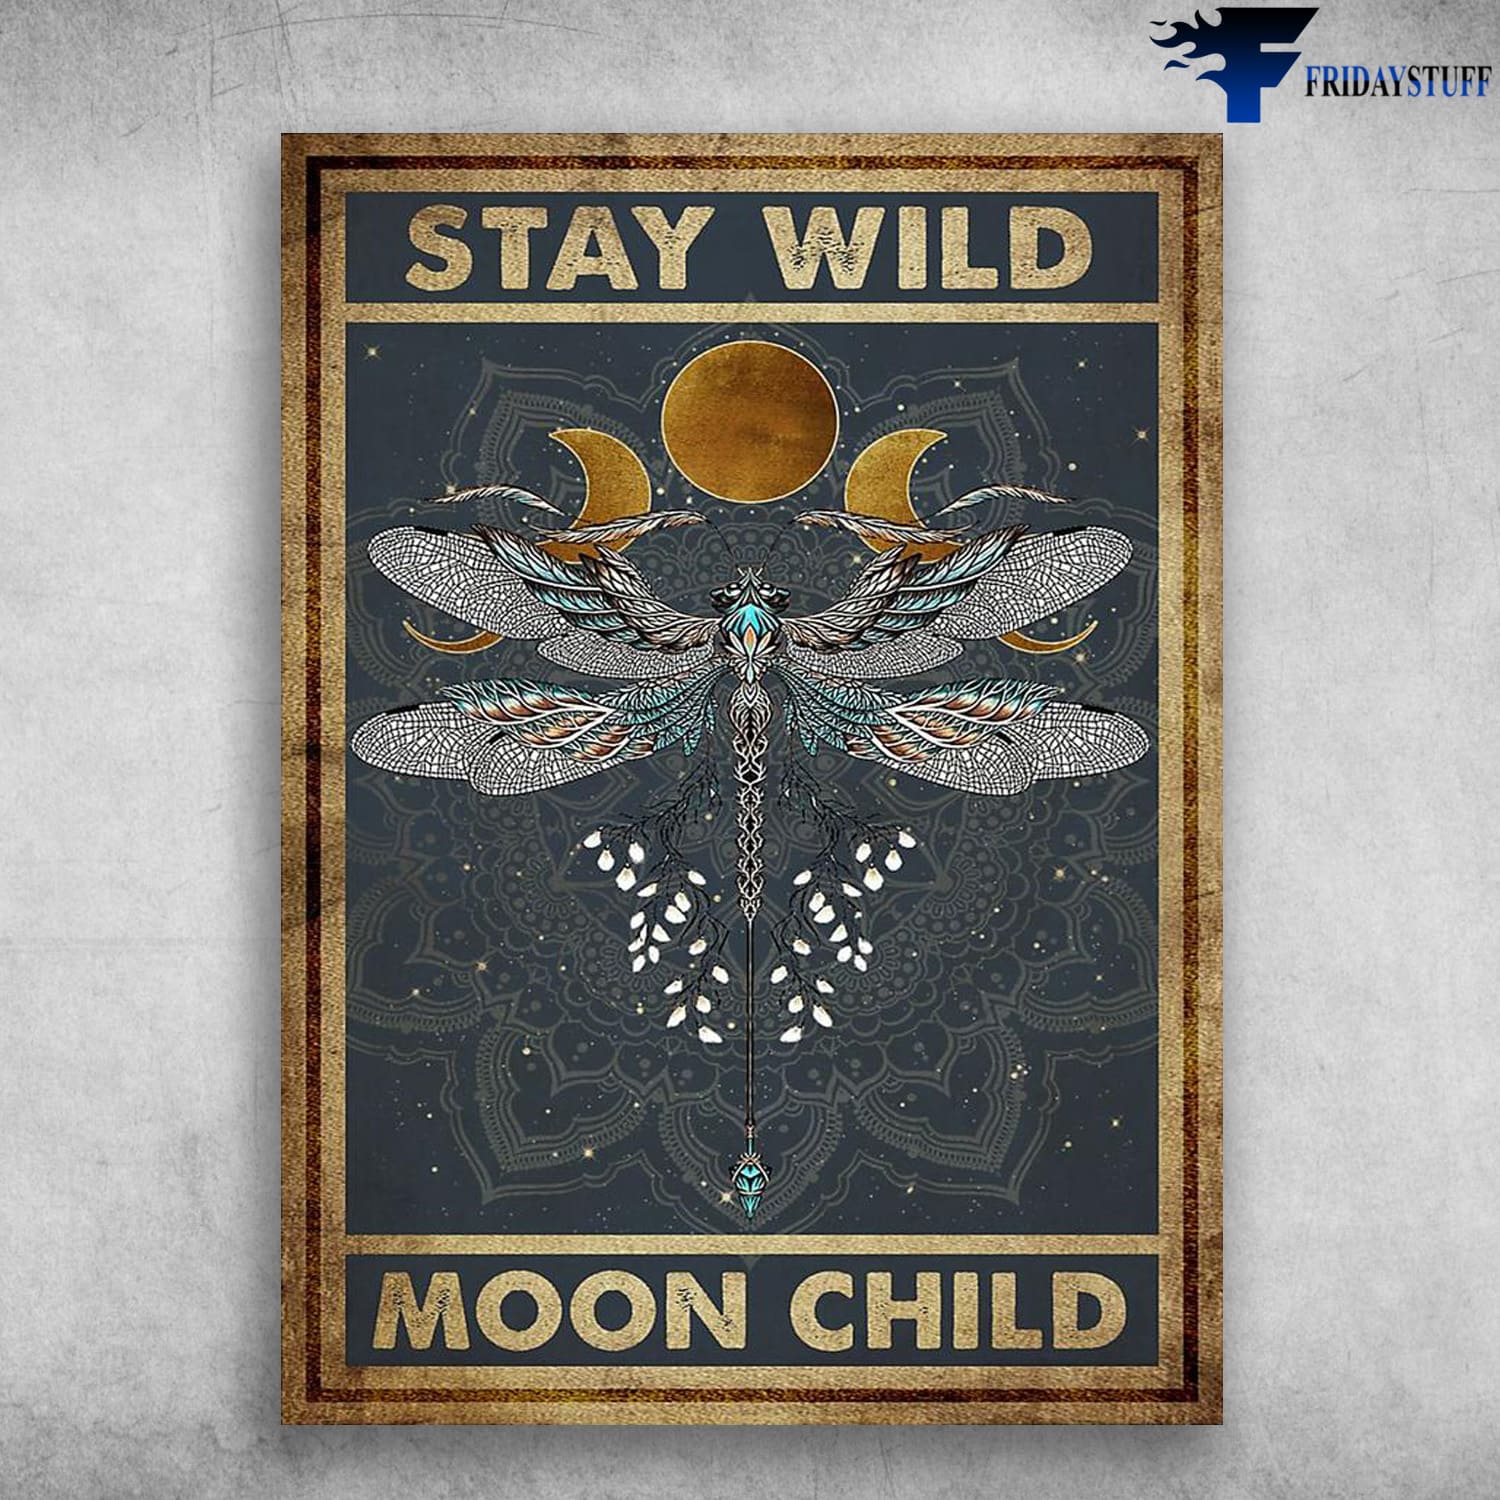 Yoga Poster, Dragonfly Yoga, Stay Wild, Moon Child